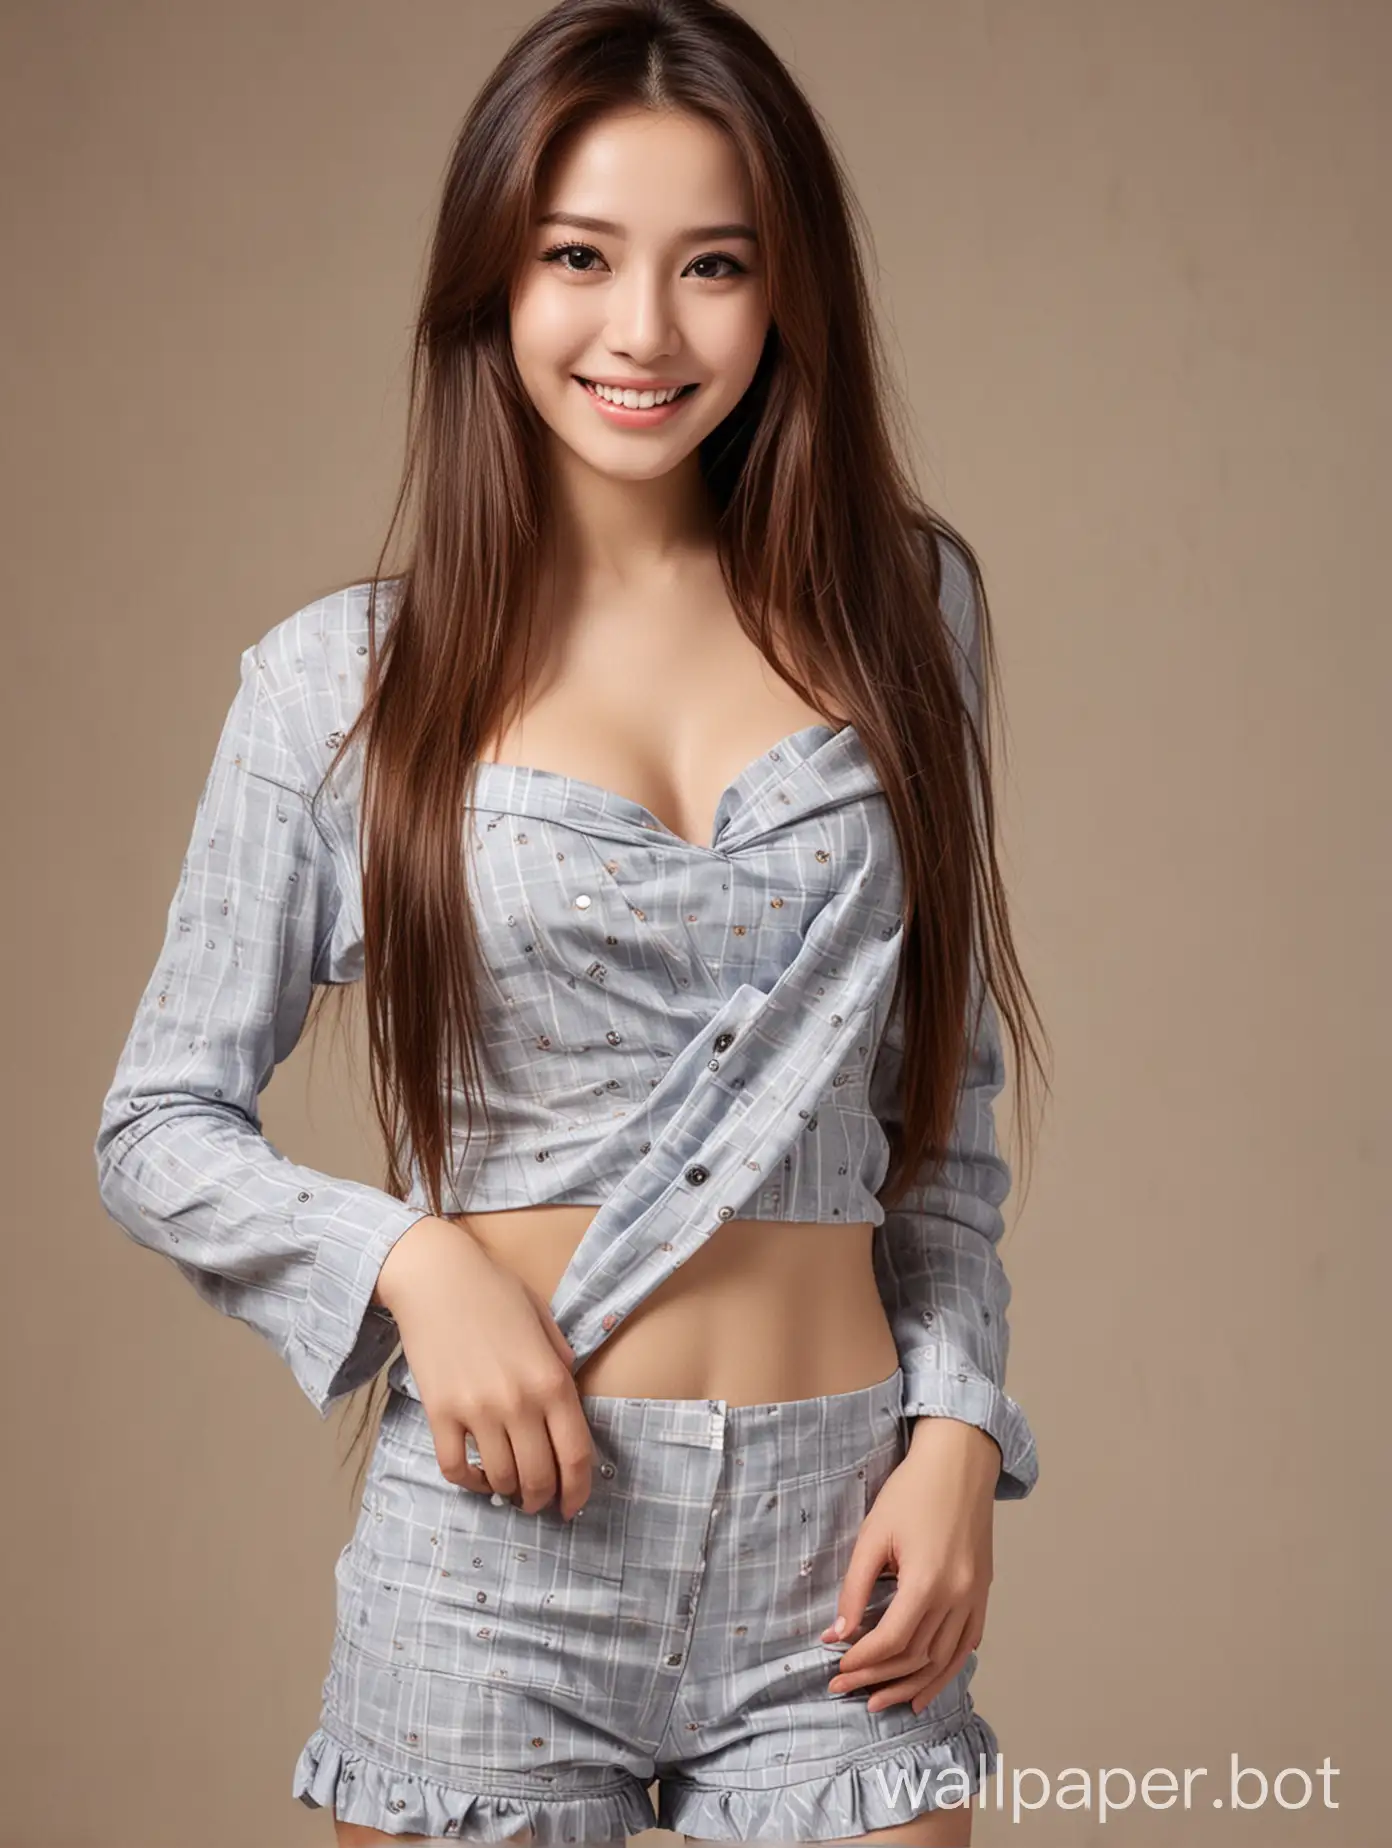 Sexy beautiful girl , smile face, long hair, wearing sexy cloth